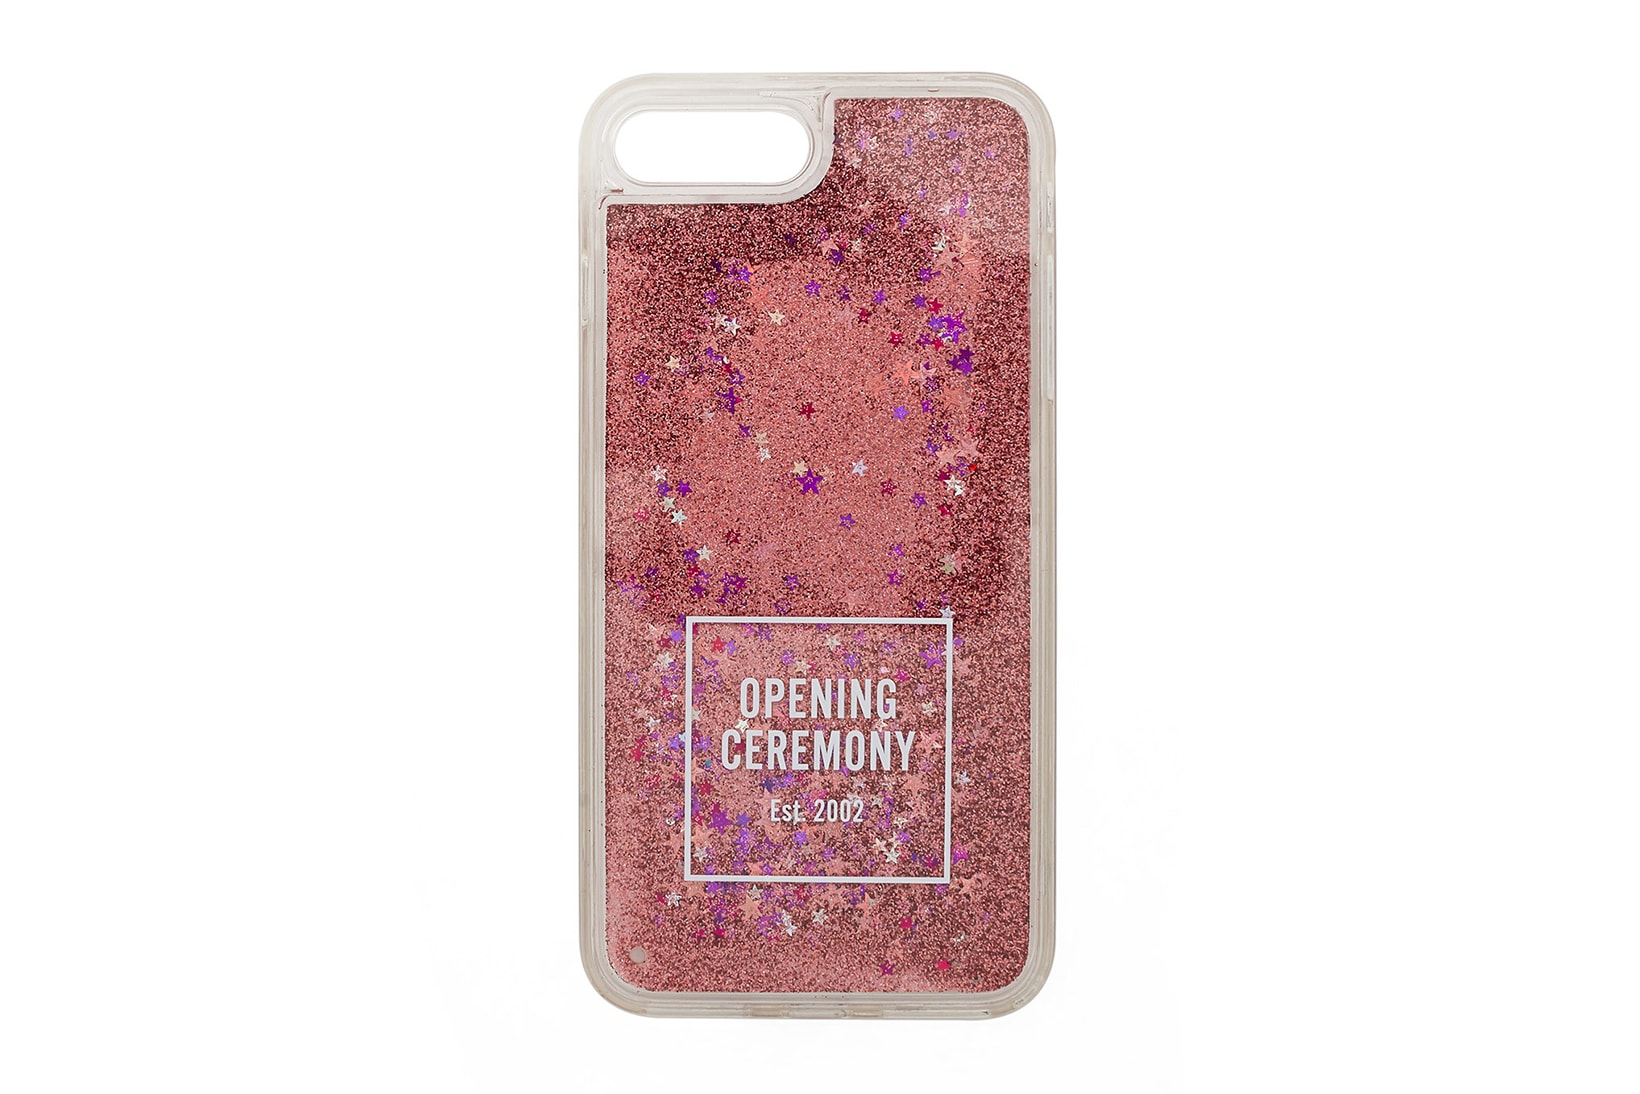 Opening Ceremony Pink Blue Glitter Waterfall Apple iPhone 8 Plus Case